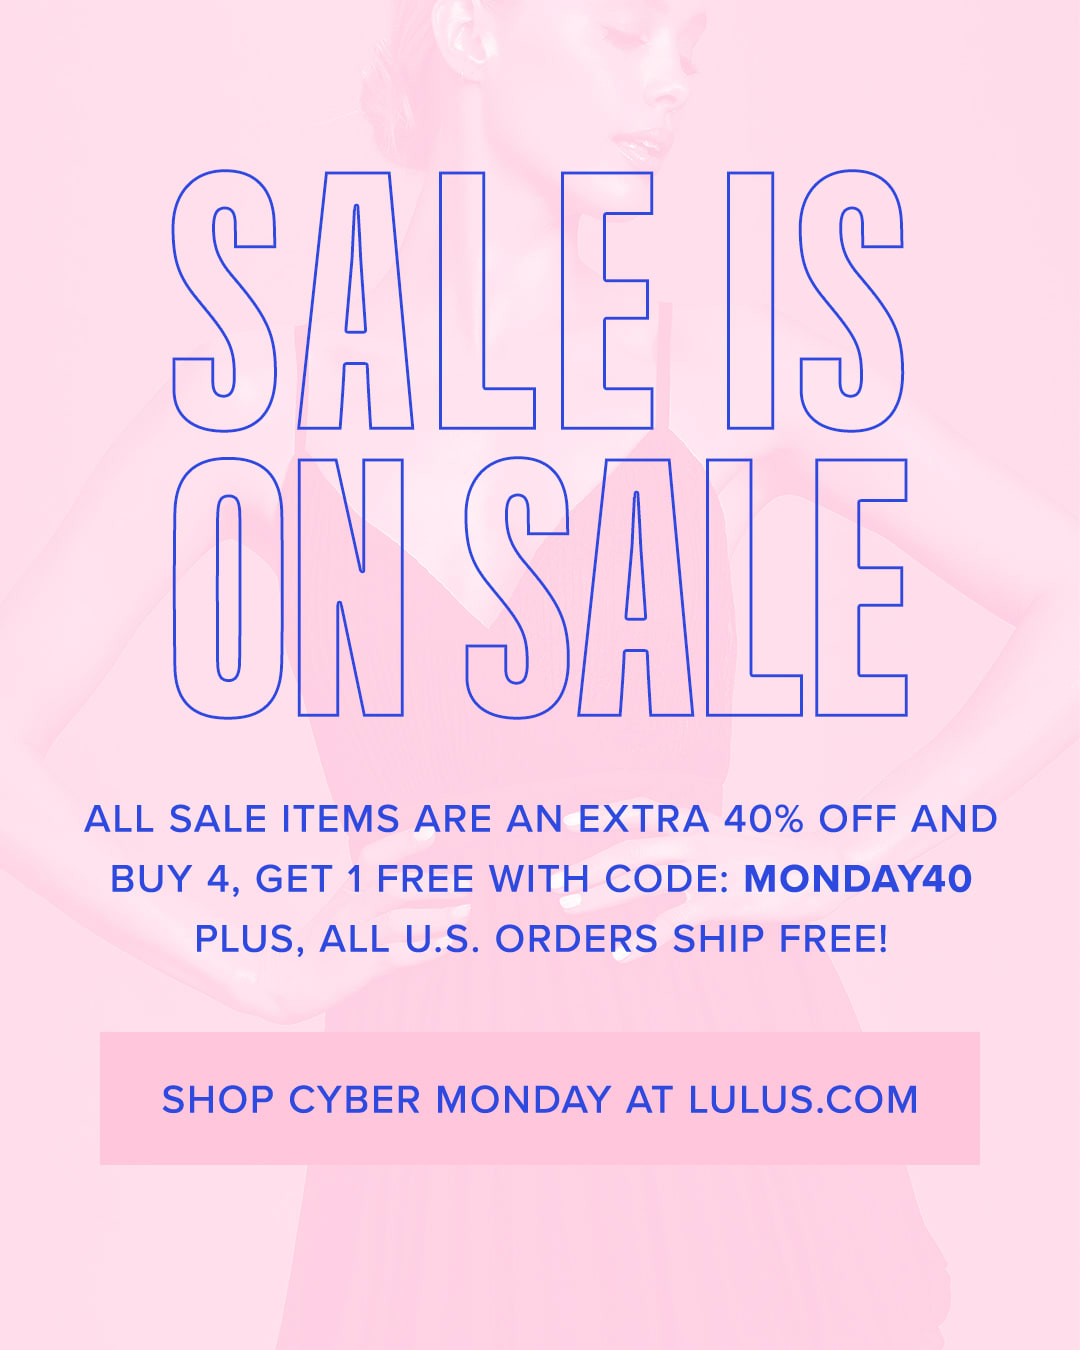 Lulus Cyber Monday Sale: Get an Extra 